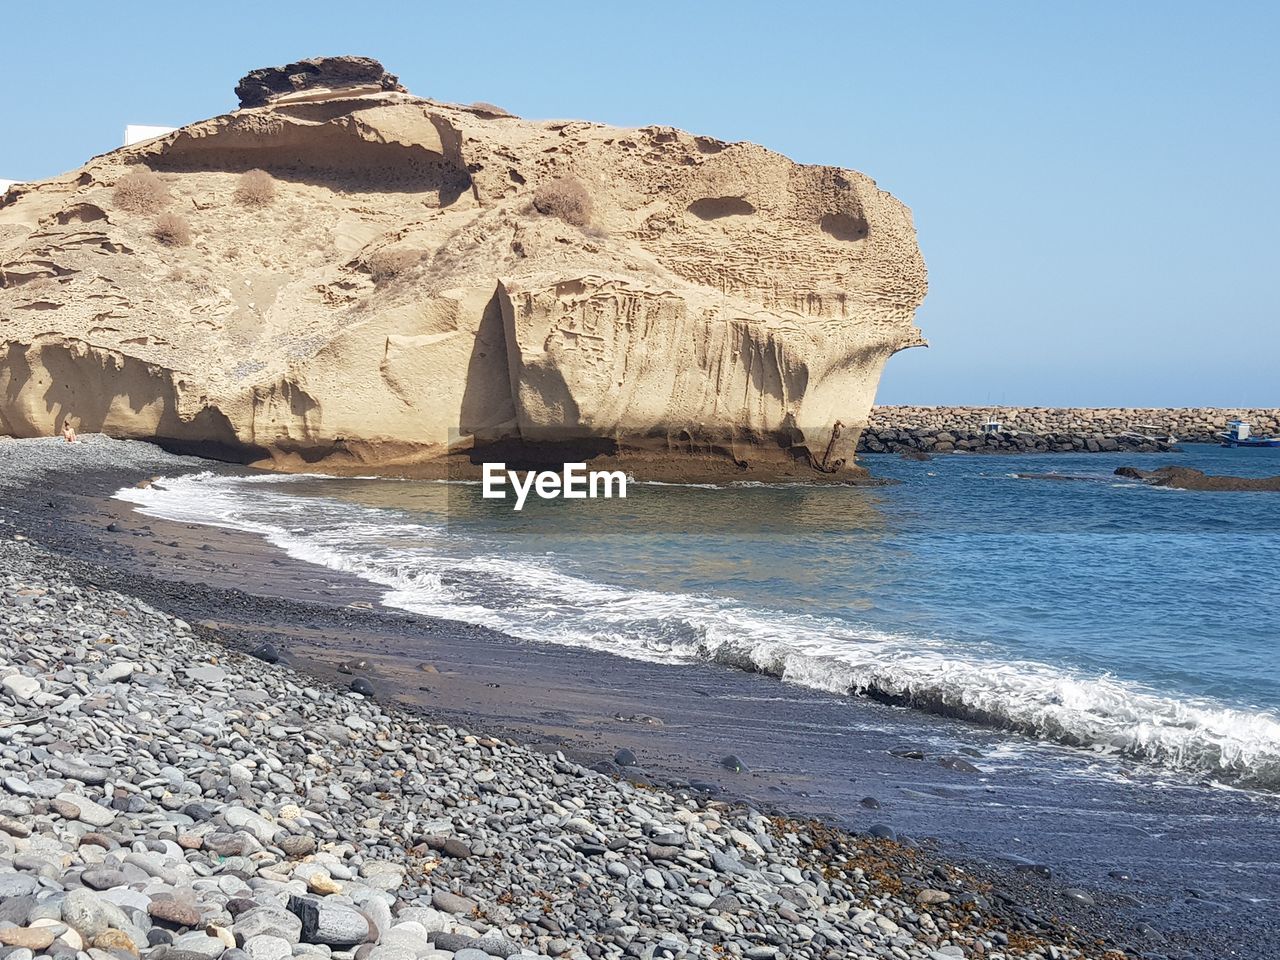 VIEW OF ROCK FORMATION ON BEACH AGAINST CLEAR SKY